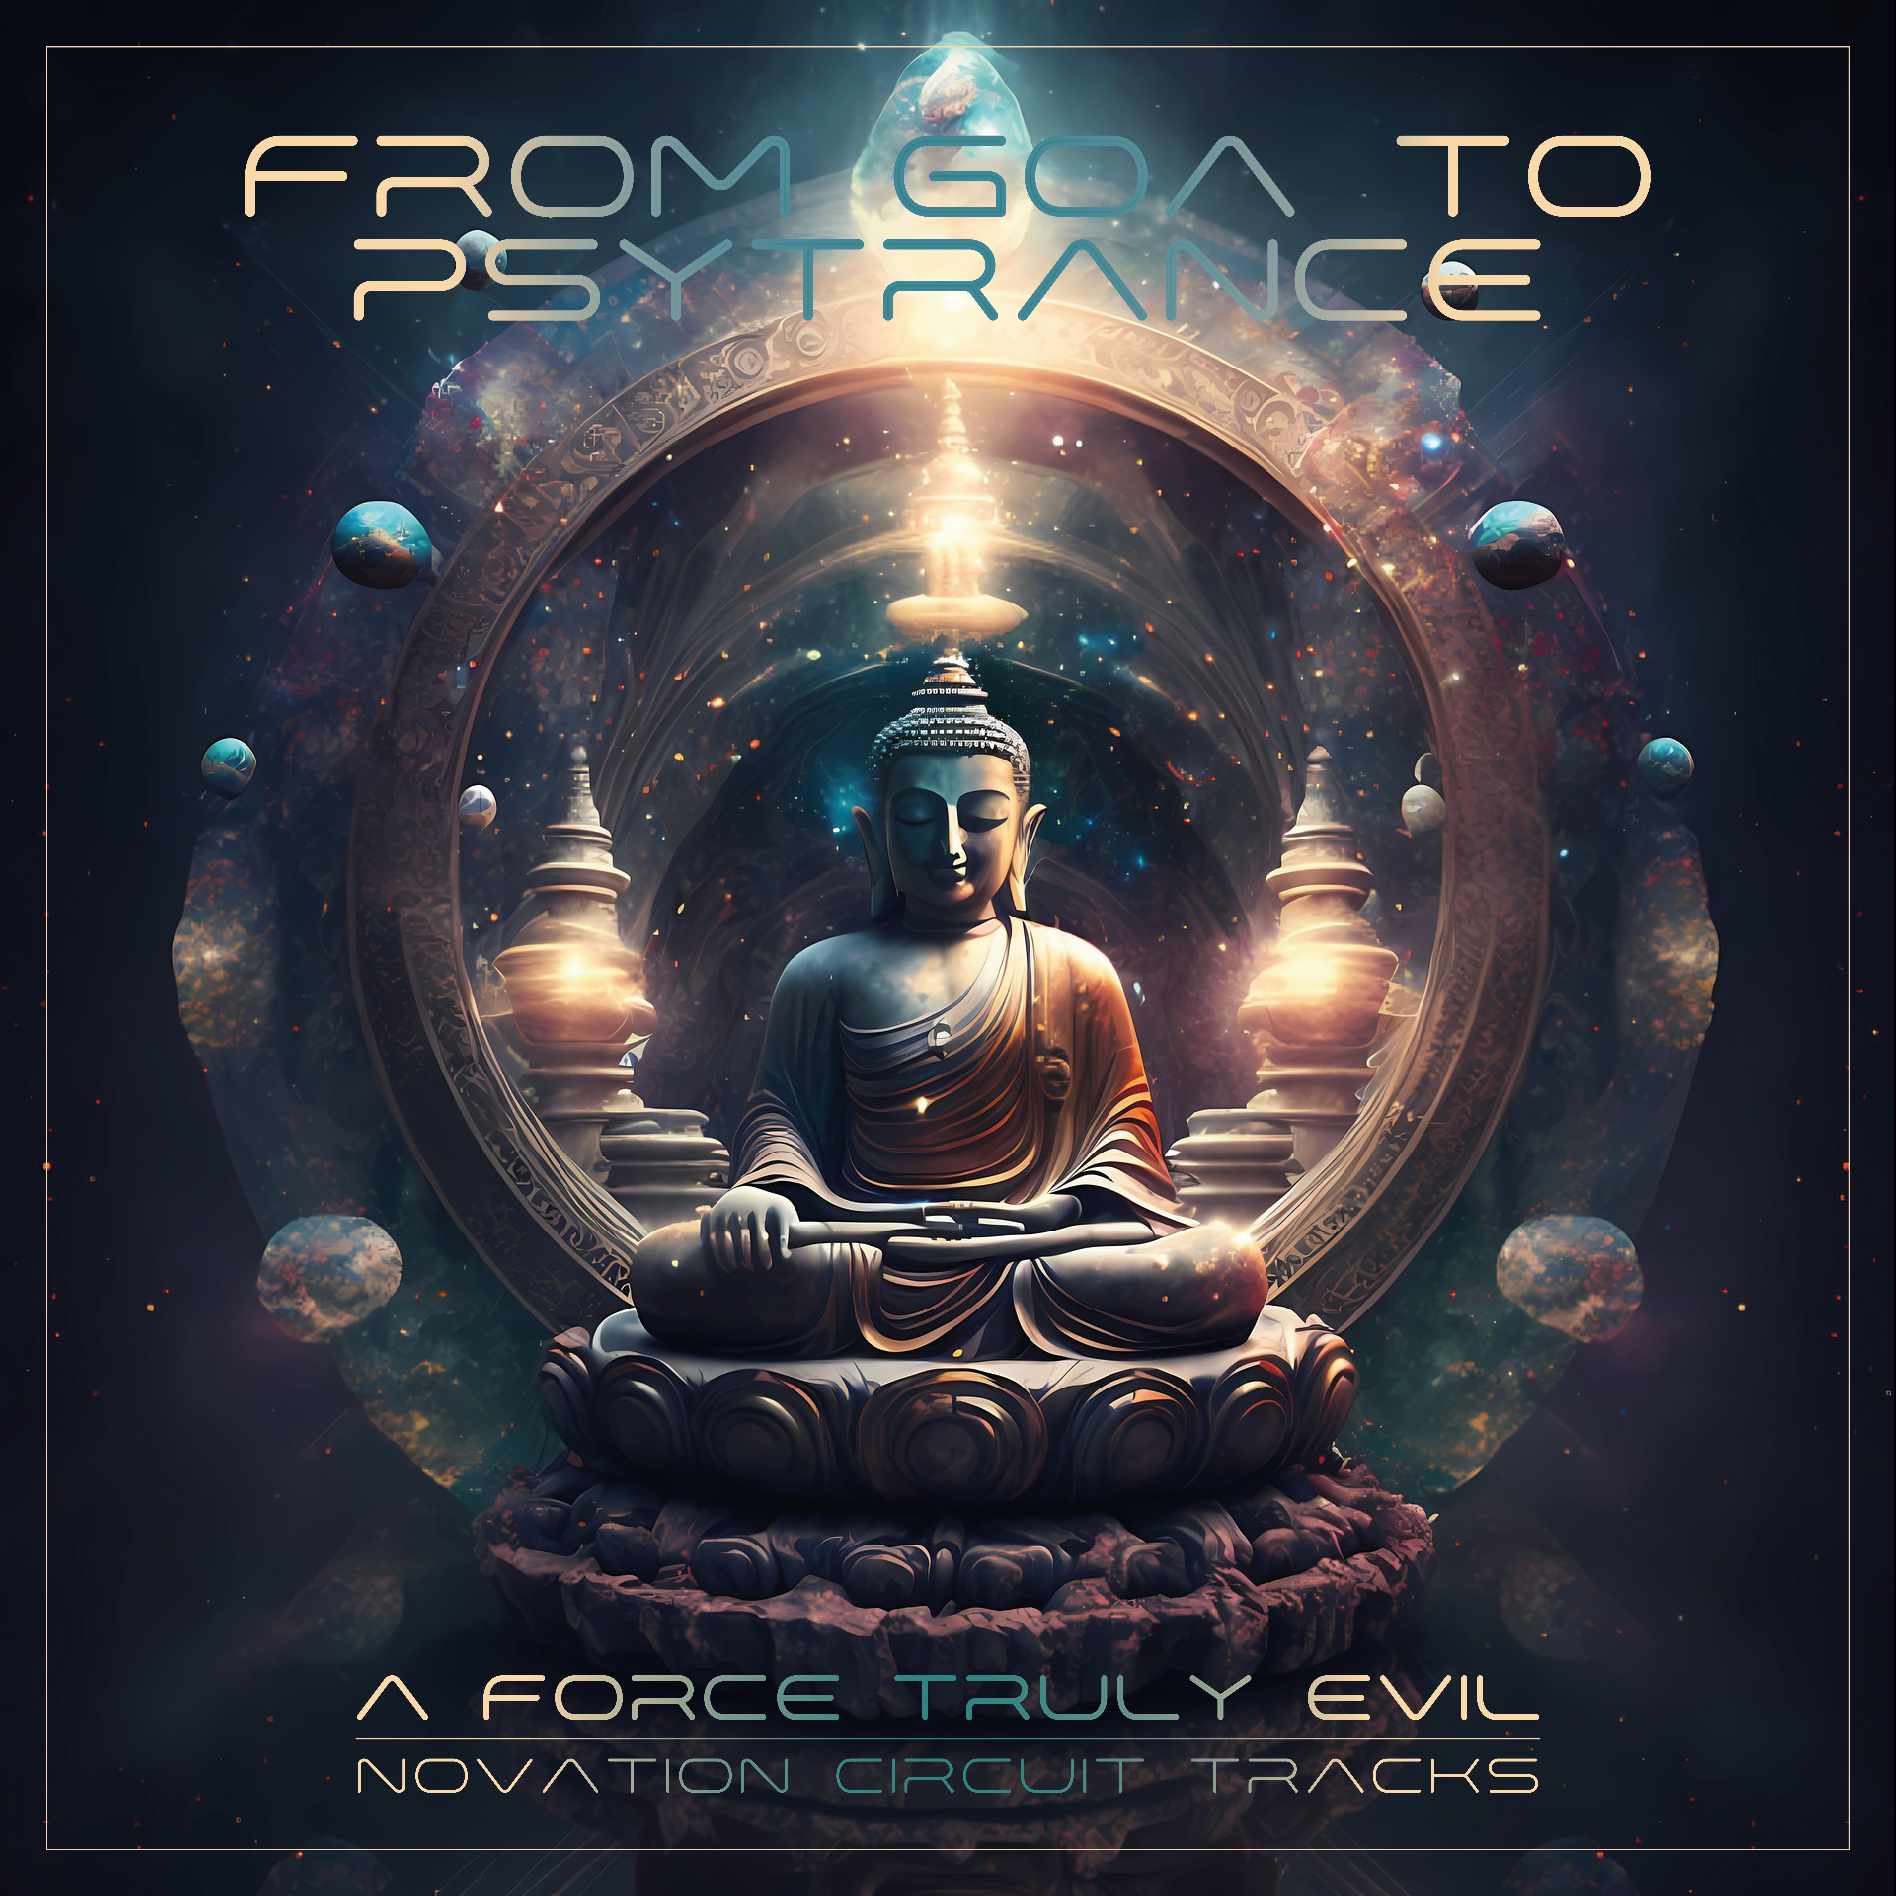 From Goa to Psytrance Novation Circuit Pack by A Force Truly Evil